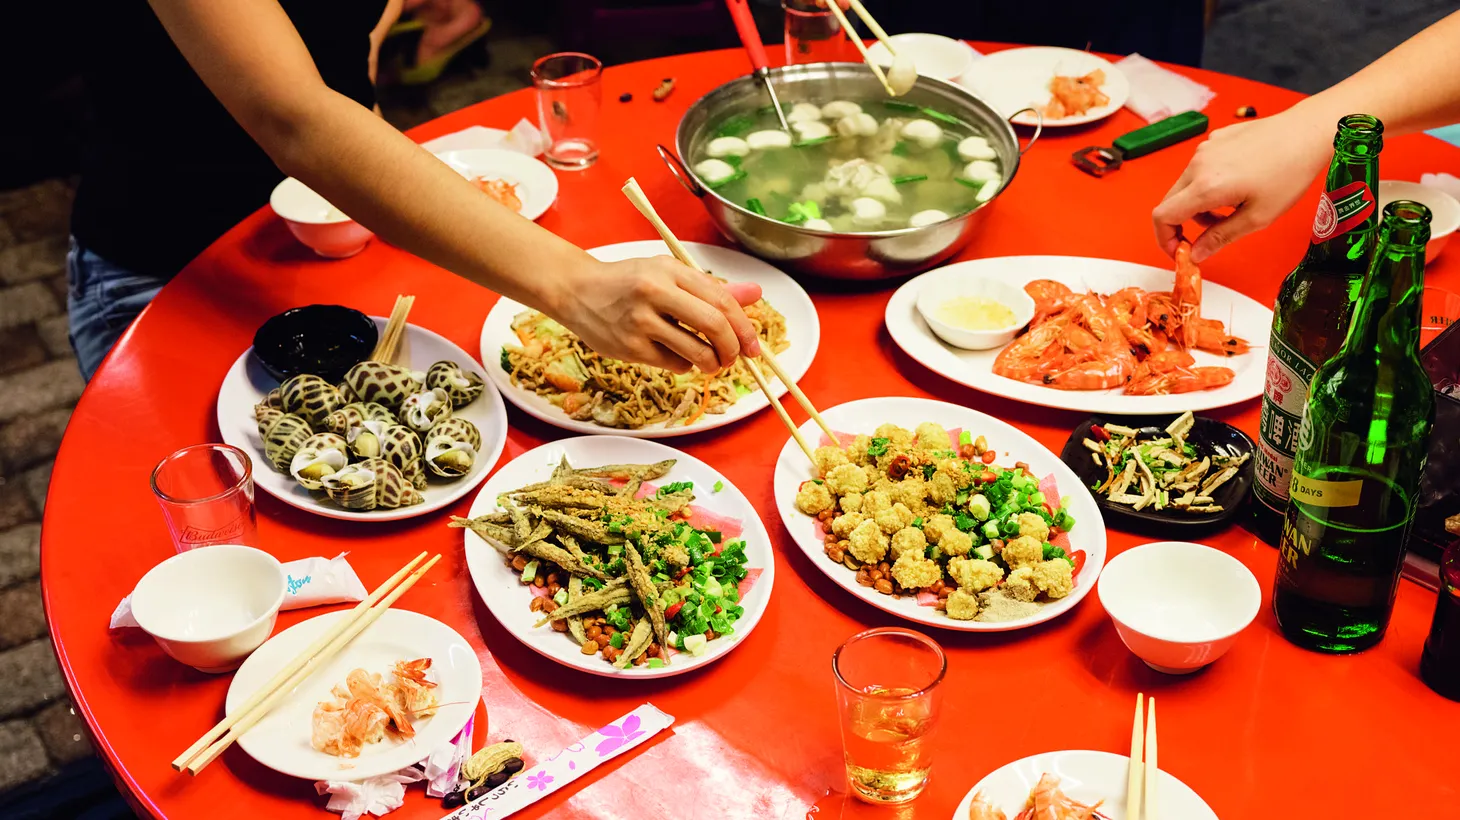 "Food is a national part of a place's identity," says Clarissa Wei. "So you're seeing restaurants and chefs, and in particular fine dining restaurants where storytelling is a natural part of the marketing, focusing on ingredients that are endemic to Taiwan."